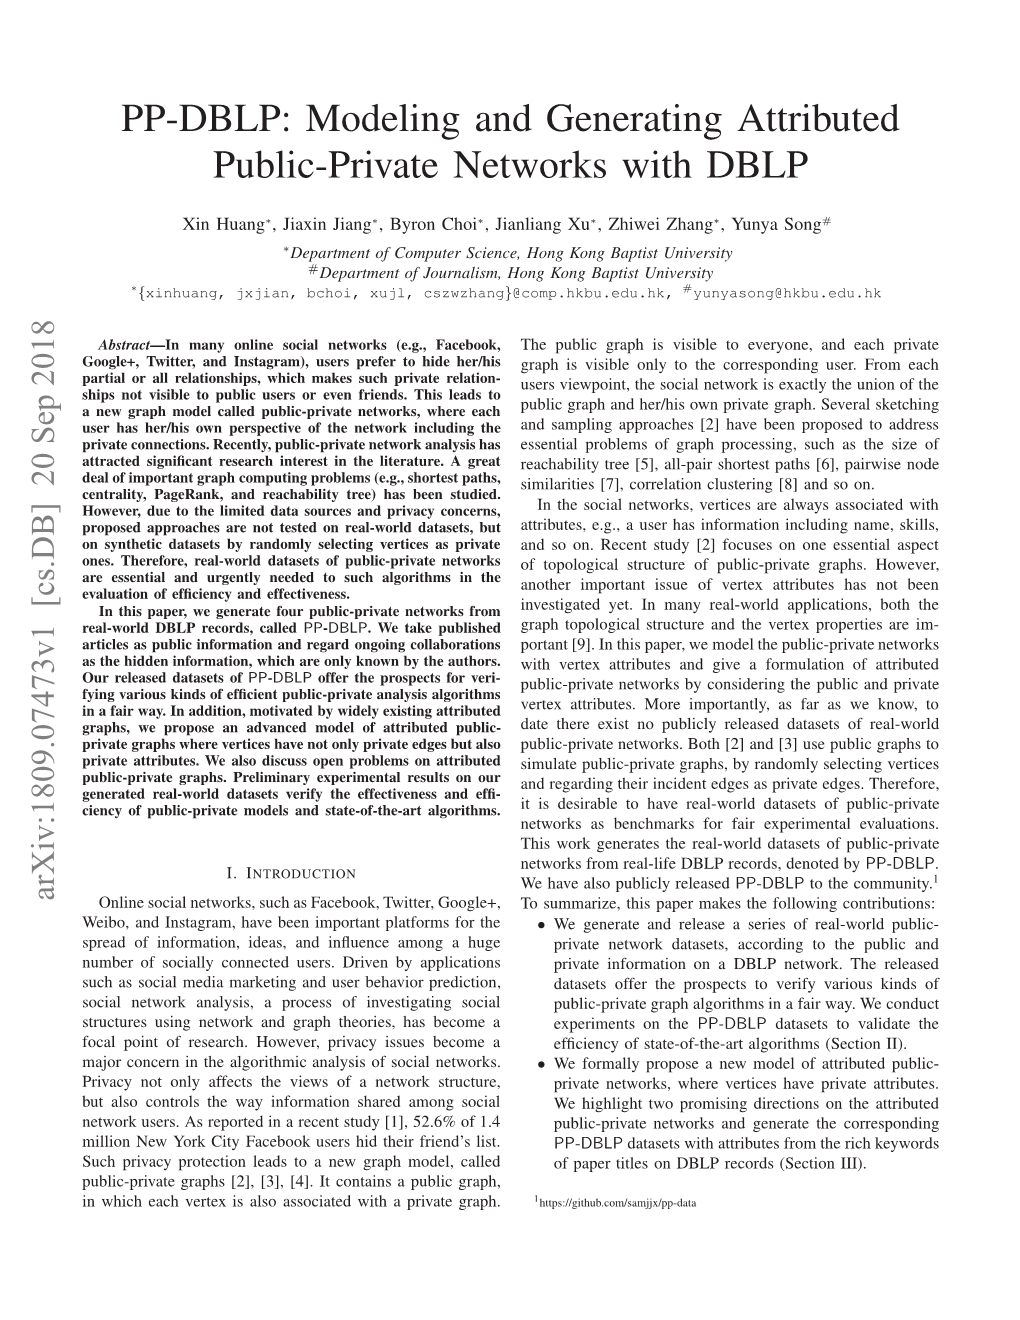 PP-DBLP: Modeling and Generating Attributed Public-Private Networks